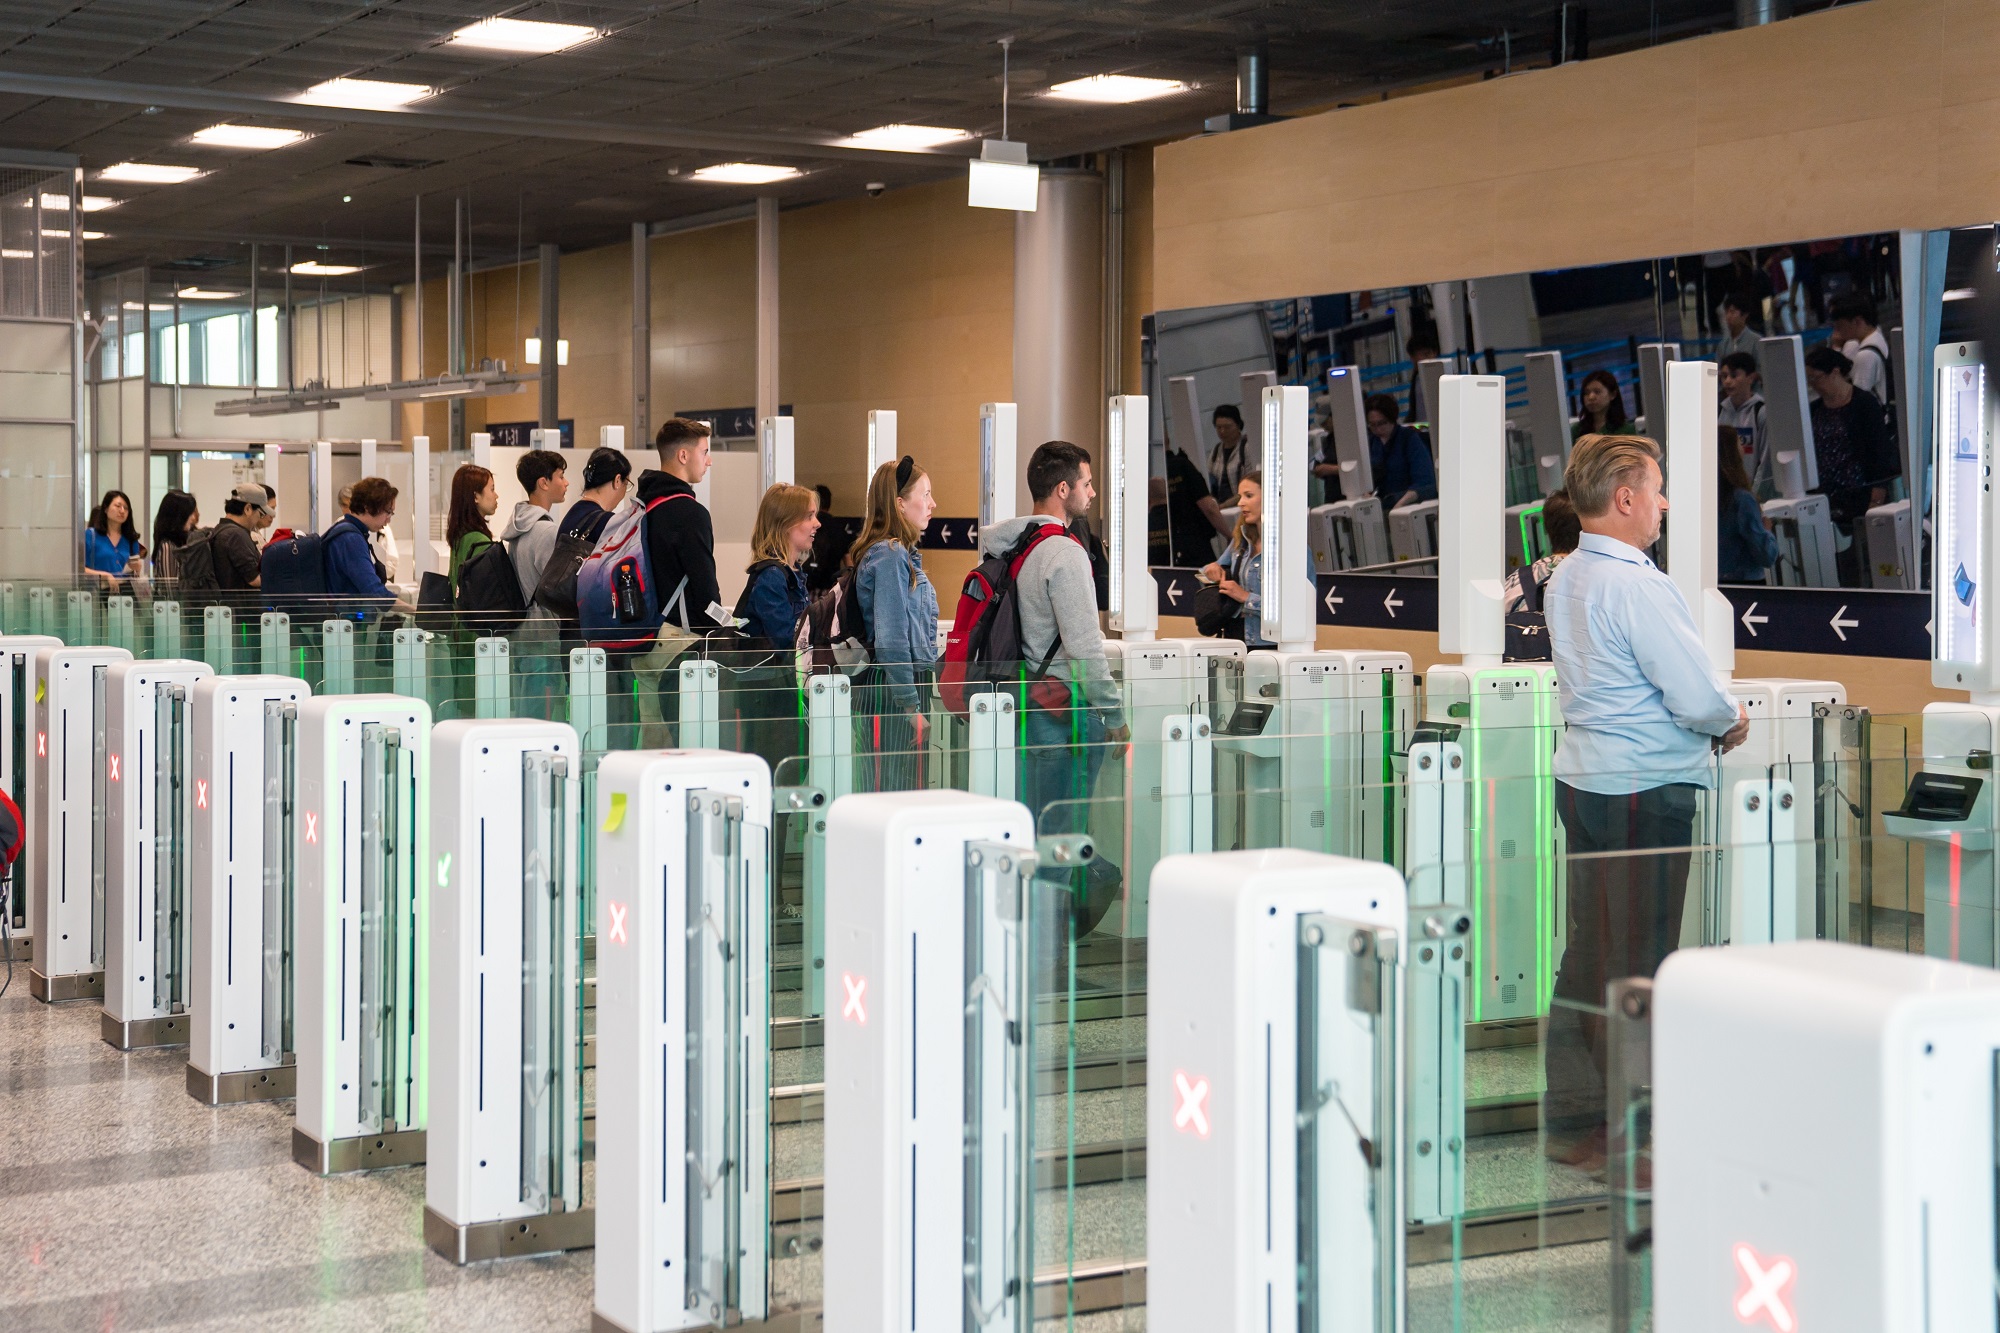 Automated border control gates and people at the airport